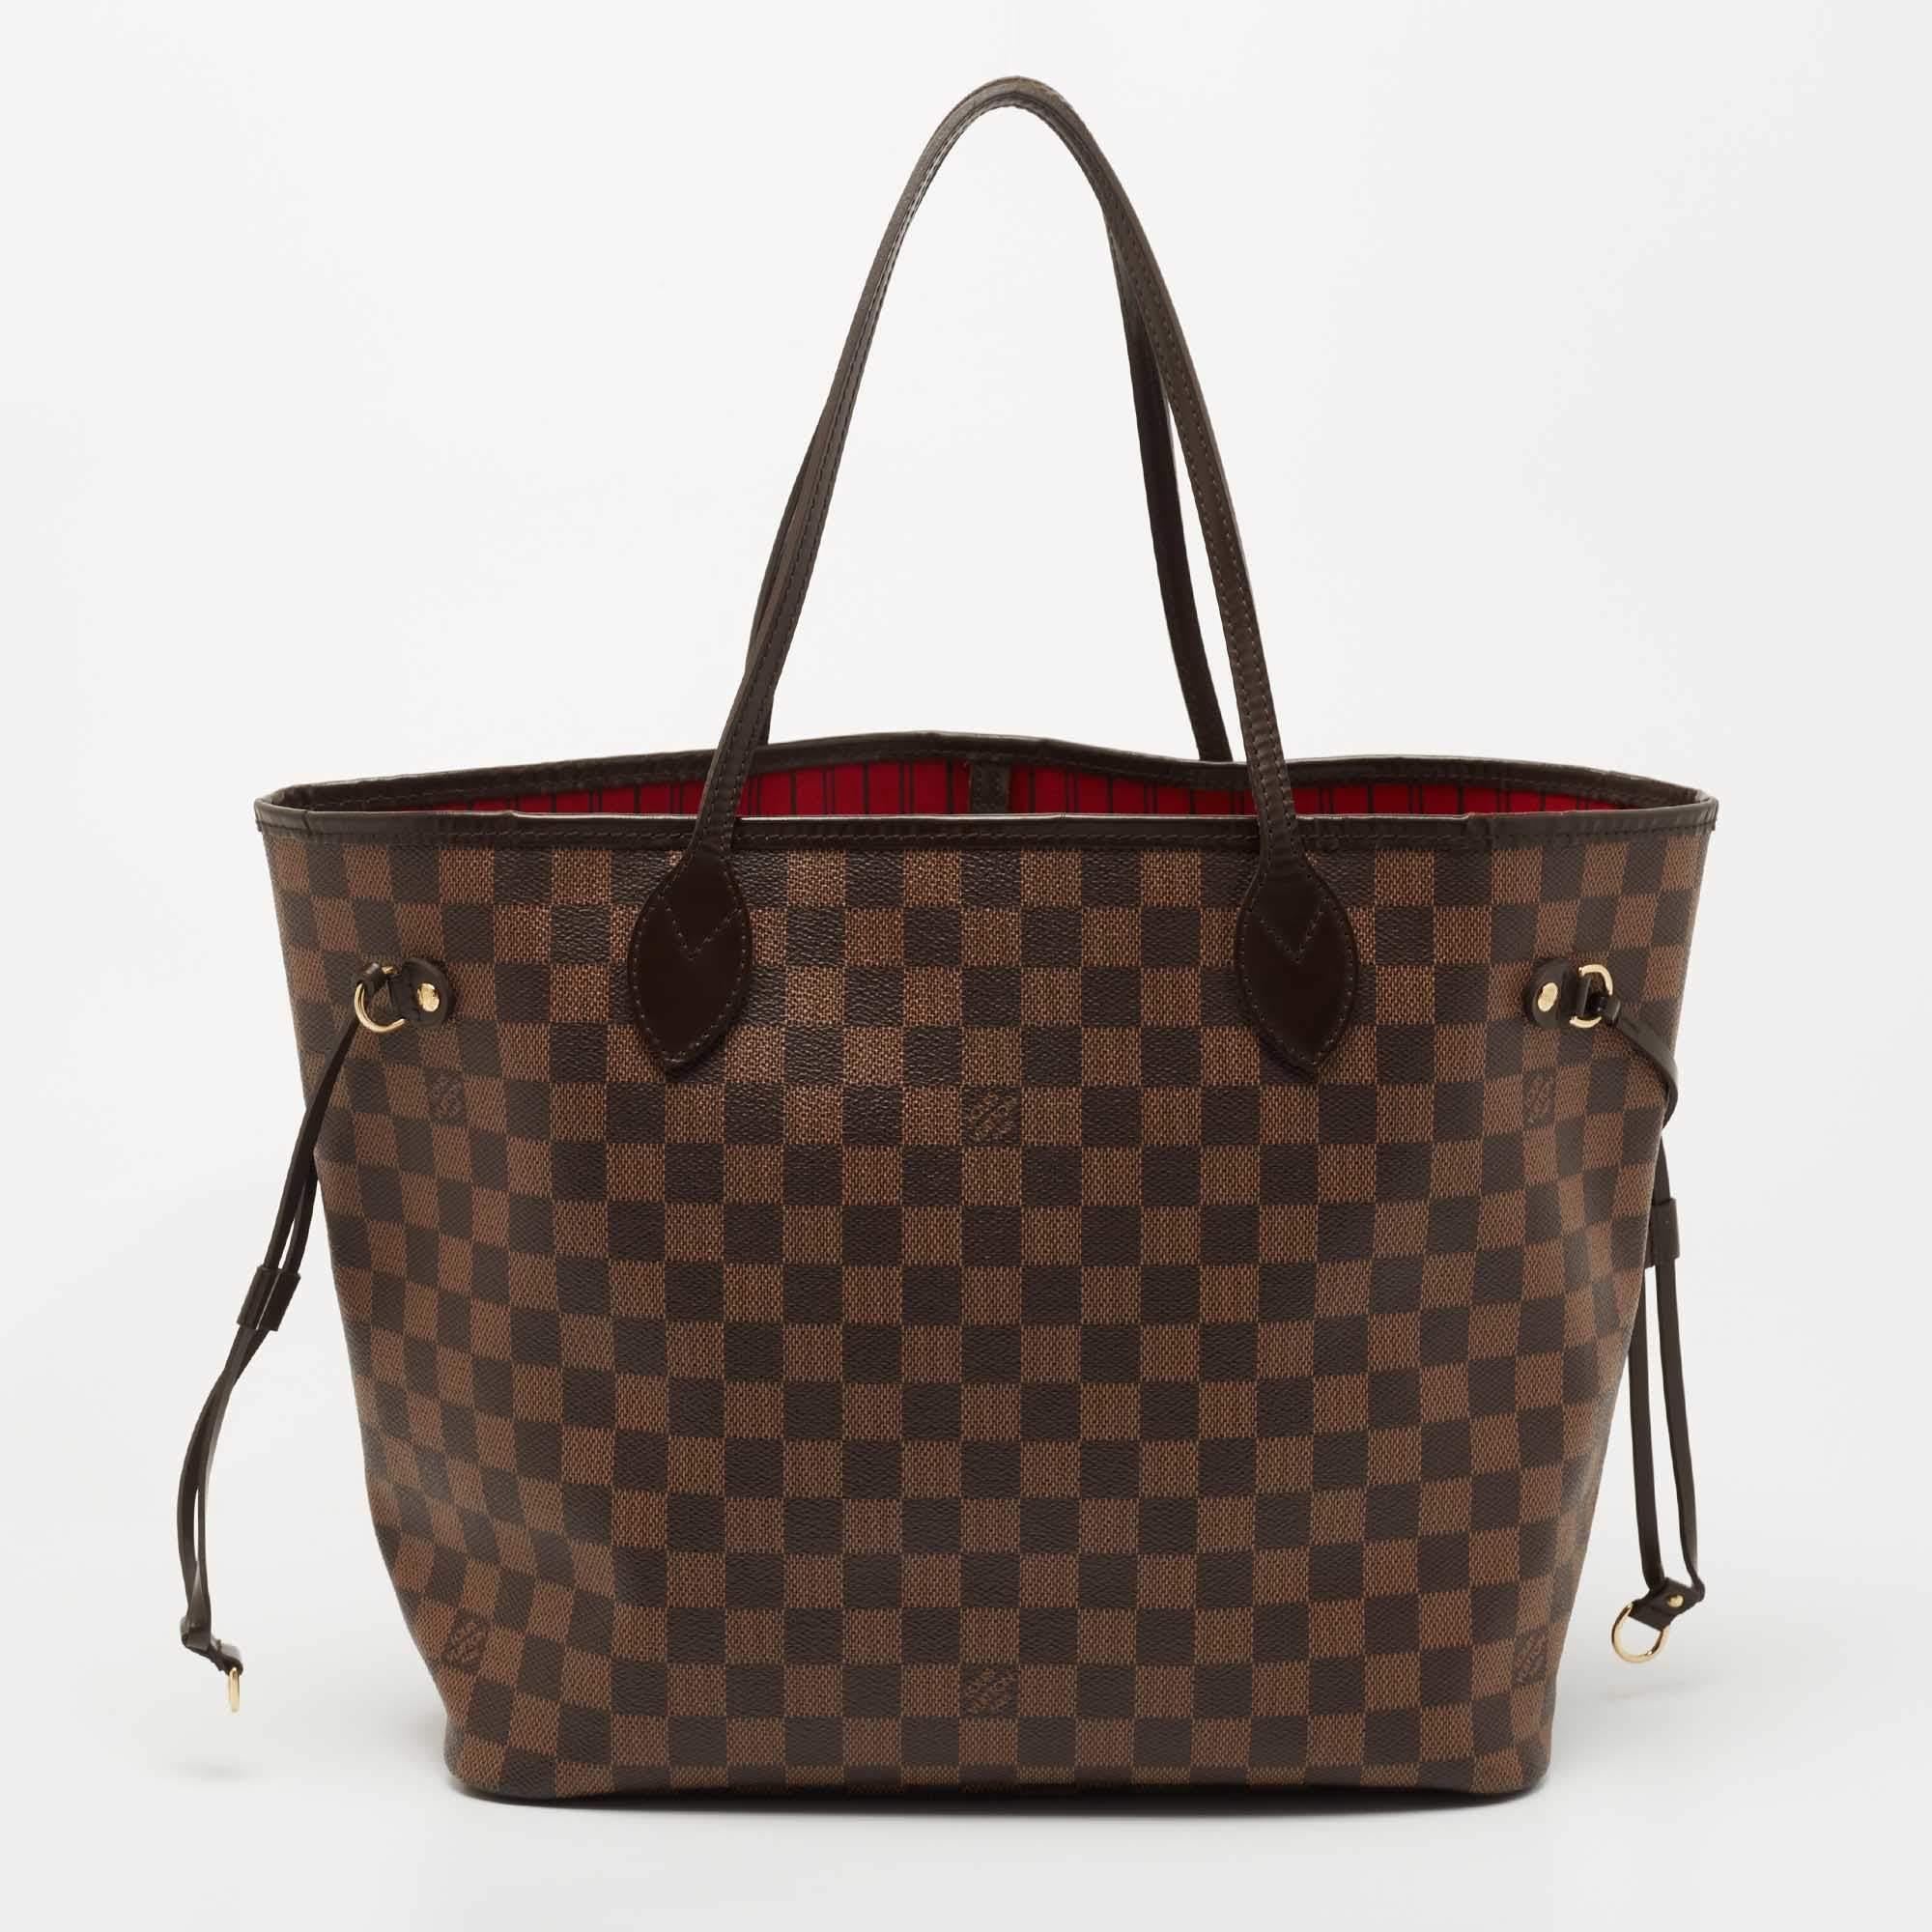 Introduced in 2007, the Neverfull by Louis Vuitton is applauded for its innovative design and faultless craftsmanship. This MM bag comes crafted from Damier Ebene canvas, and its classy features contribute to its timeless elegance. With a structured